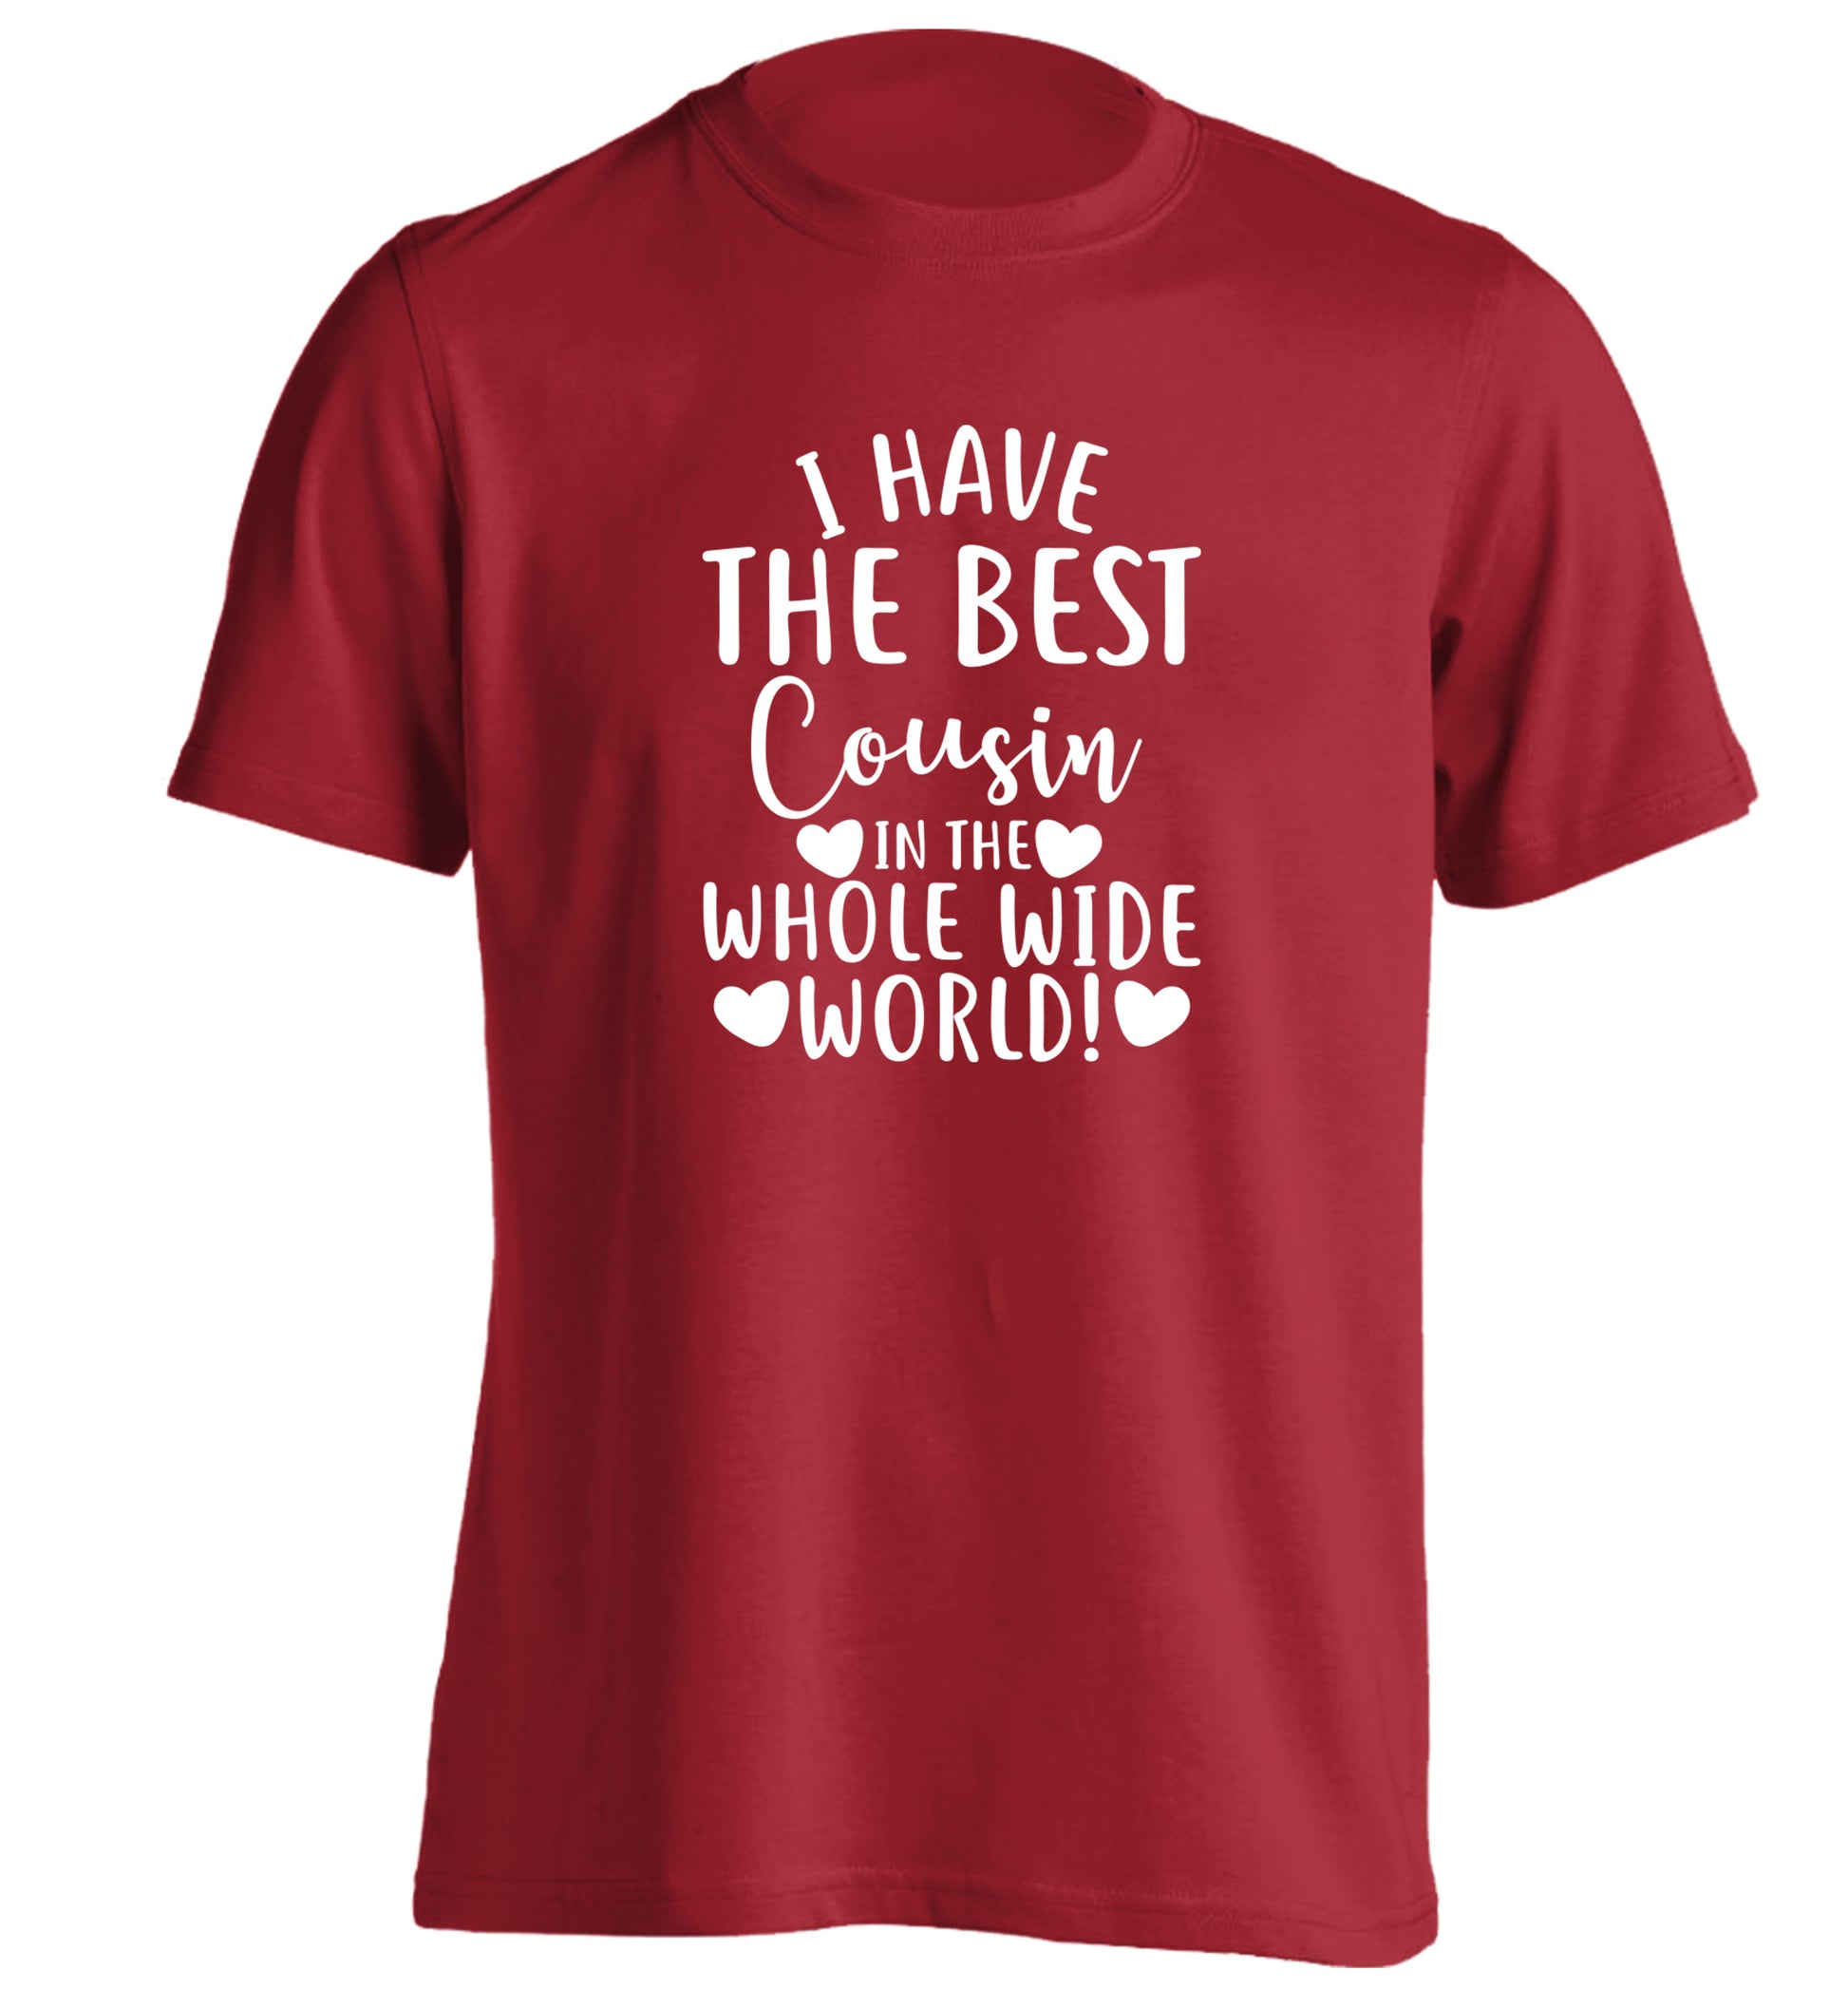 I have the best cousin in the whole wide world! adults unisex red Tshirt 2XL